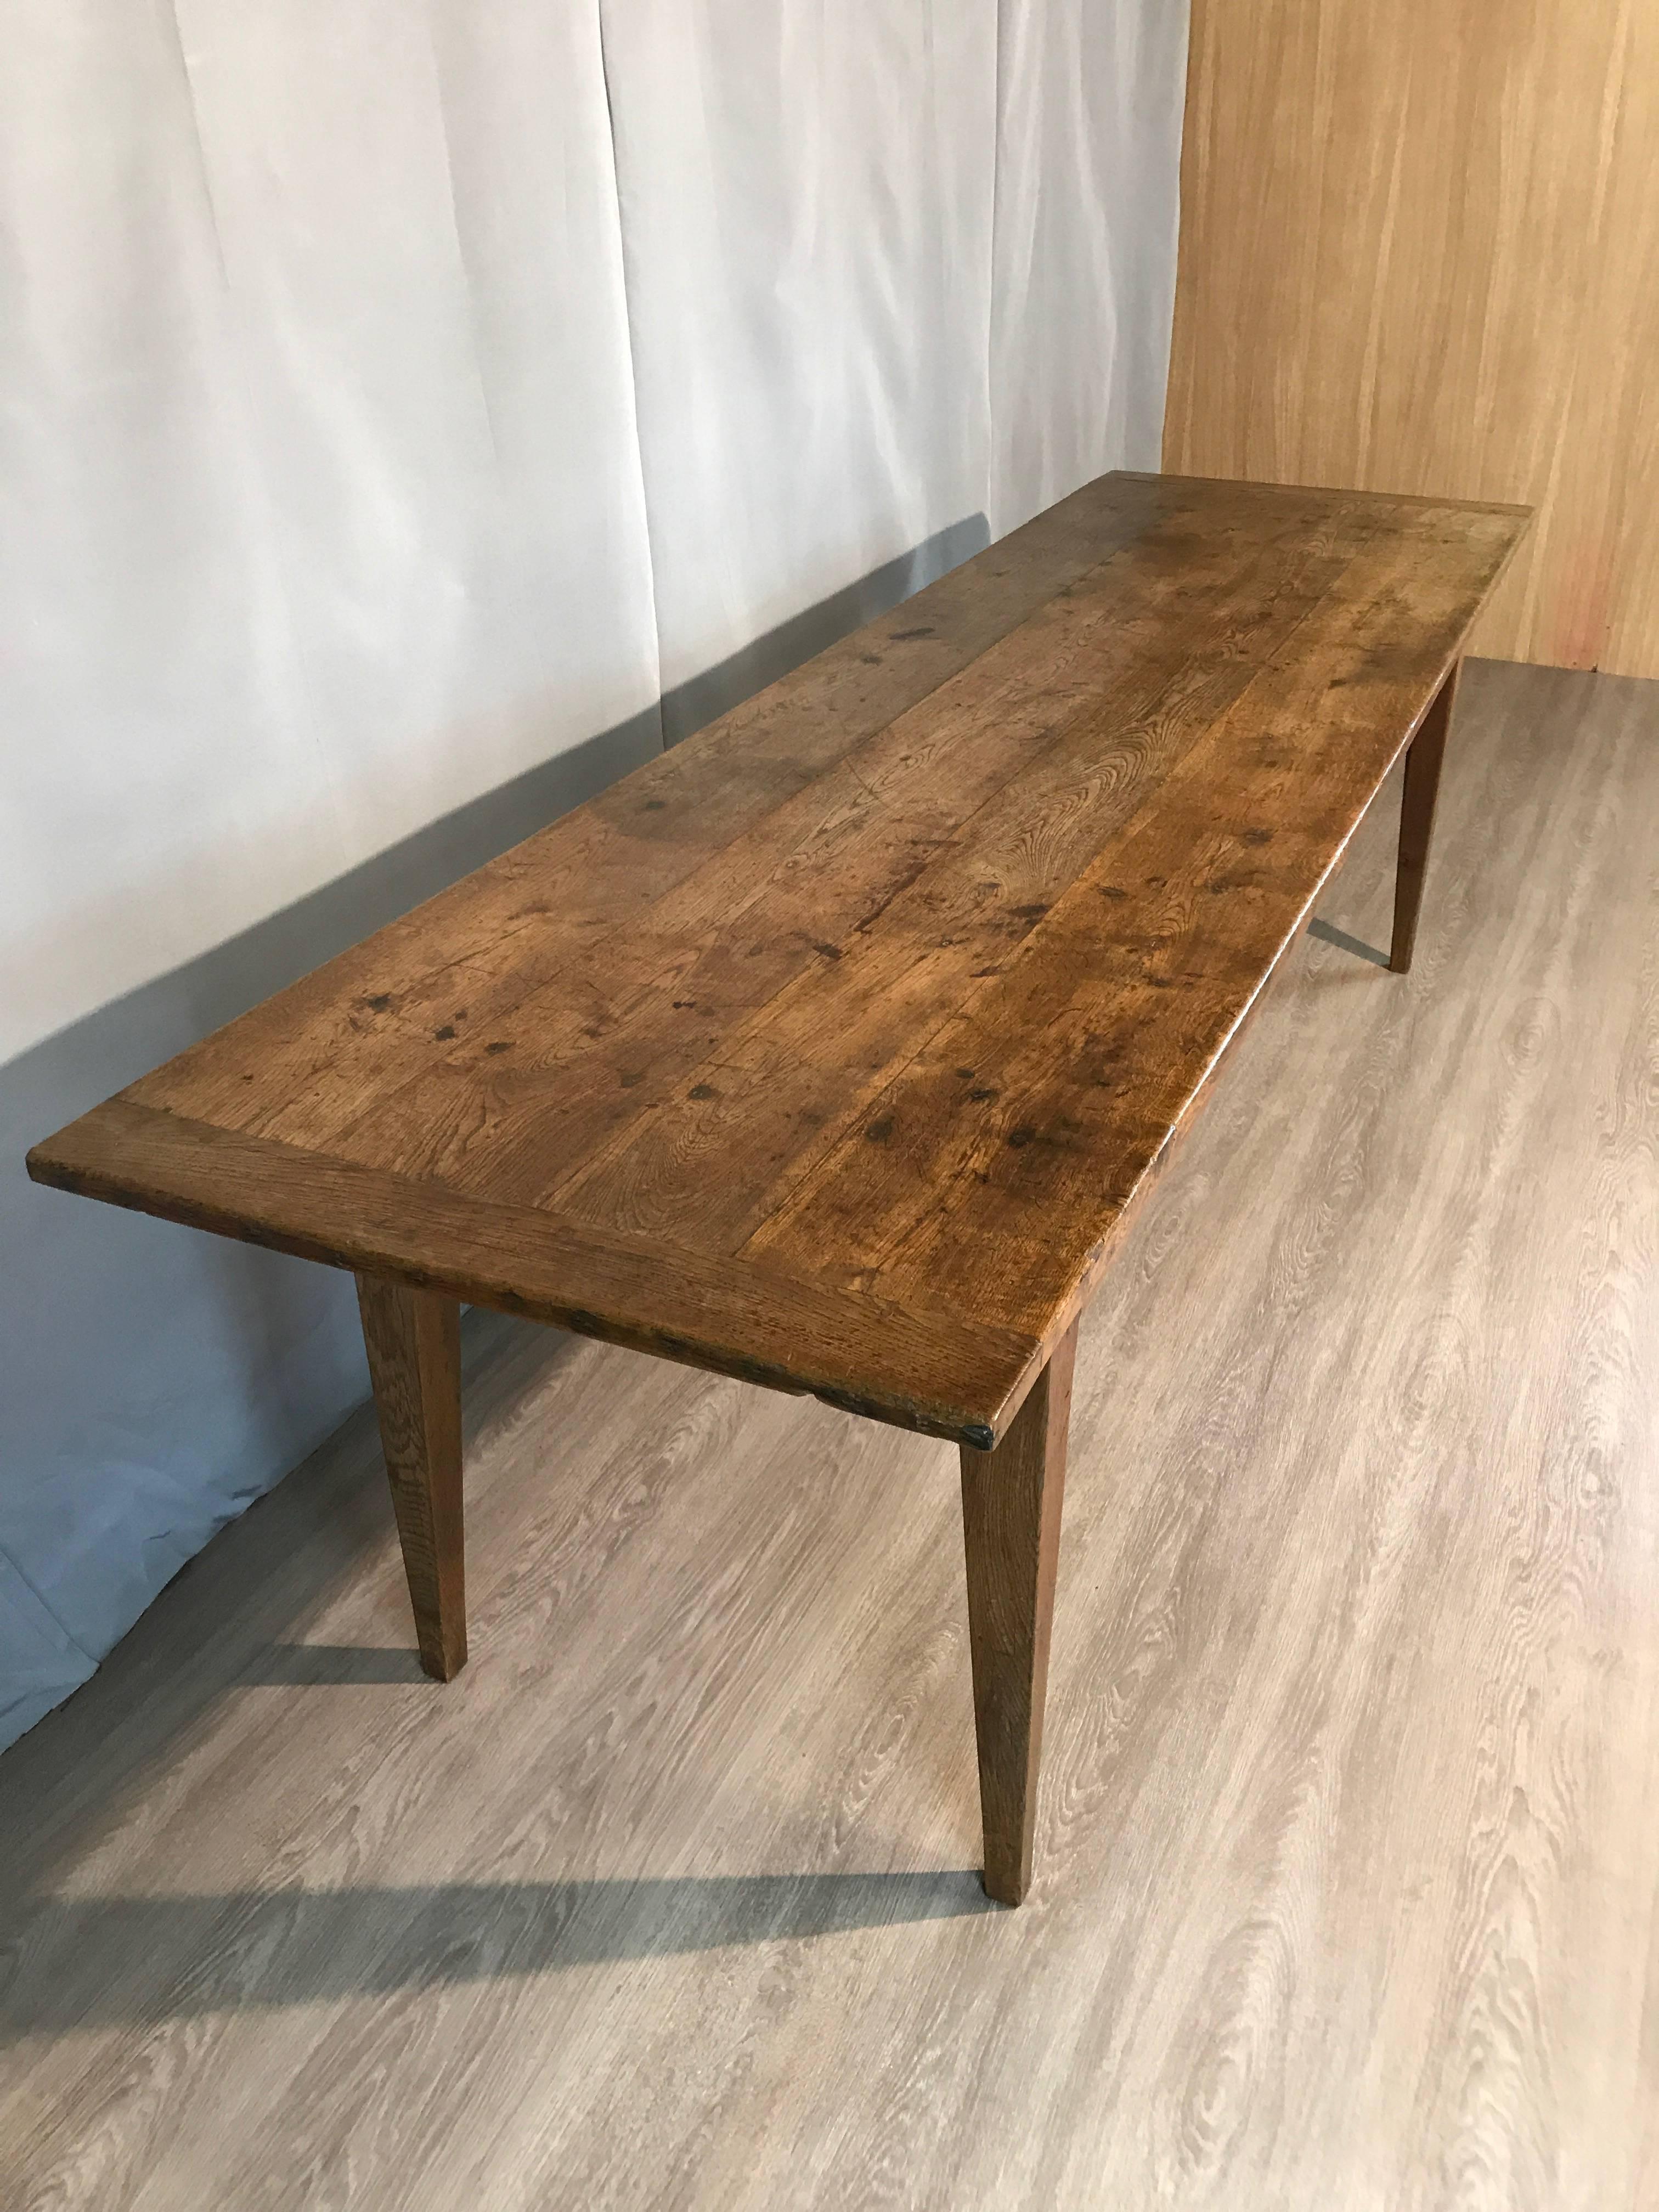 Early 19th century oak serving table with one centre drawer and two sliding panels sits on tapered legs with ample leg room. Both compartments with panels were used for storing the dough bread. This beautiful oak serving table can be used either as